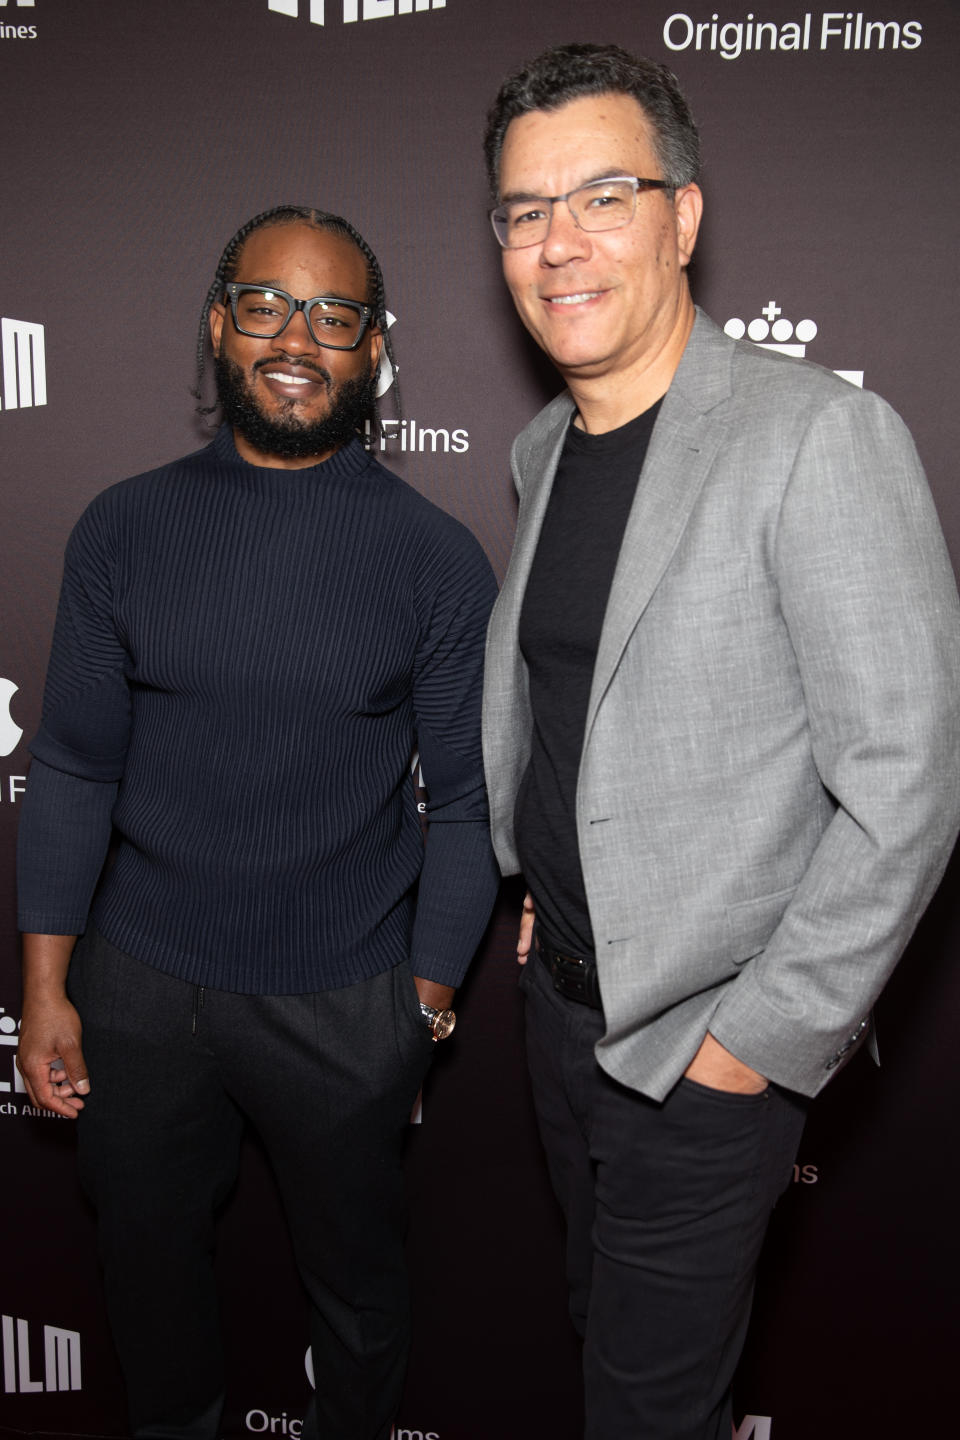 Producer Ryan Coogler and director Peter Nicks arrive at the opening night premiere of "Stephen Curry: Underrated" at 66th San Francisco International Film Festival at Grand Lake Theatre on April 13, 2023 in Oakland, California